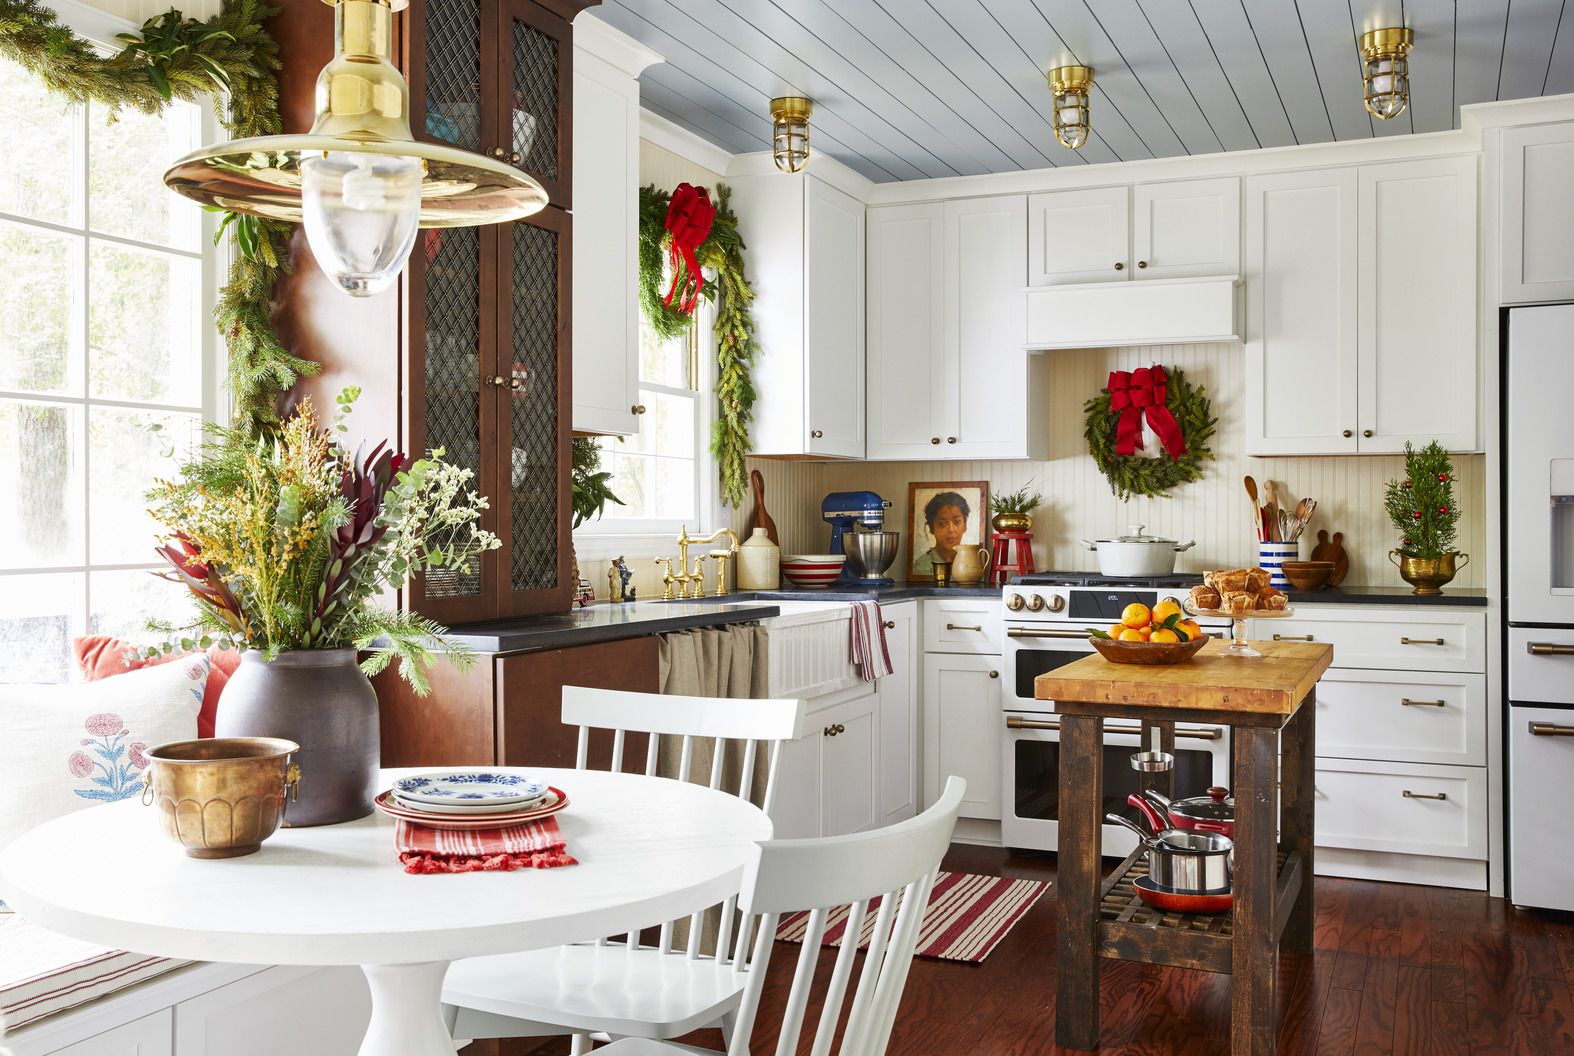 CHRISTMAS KITCHEN DECOR IN BLUE AND GOLD